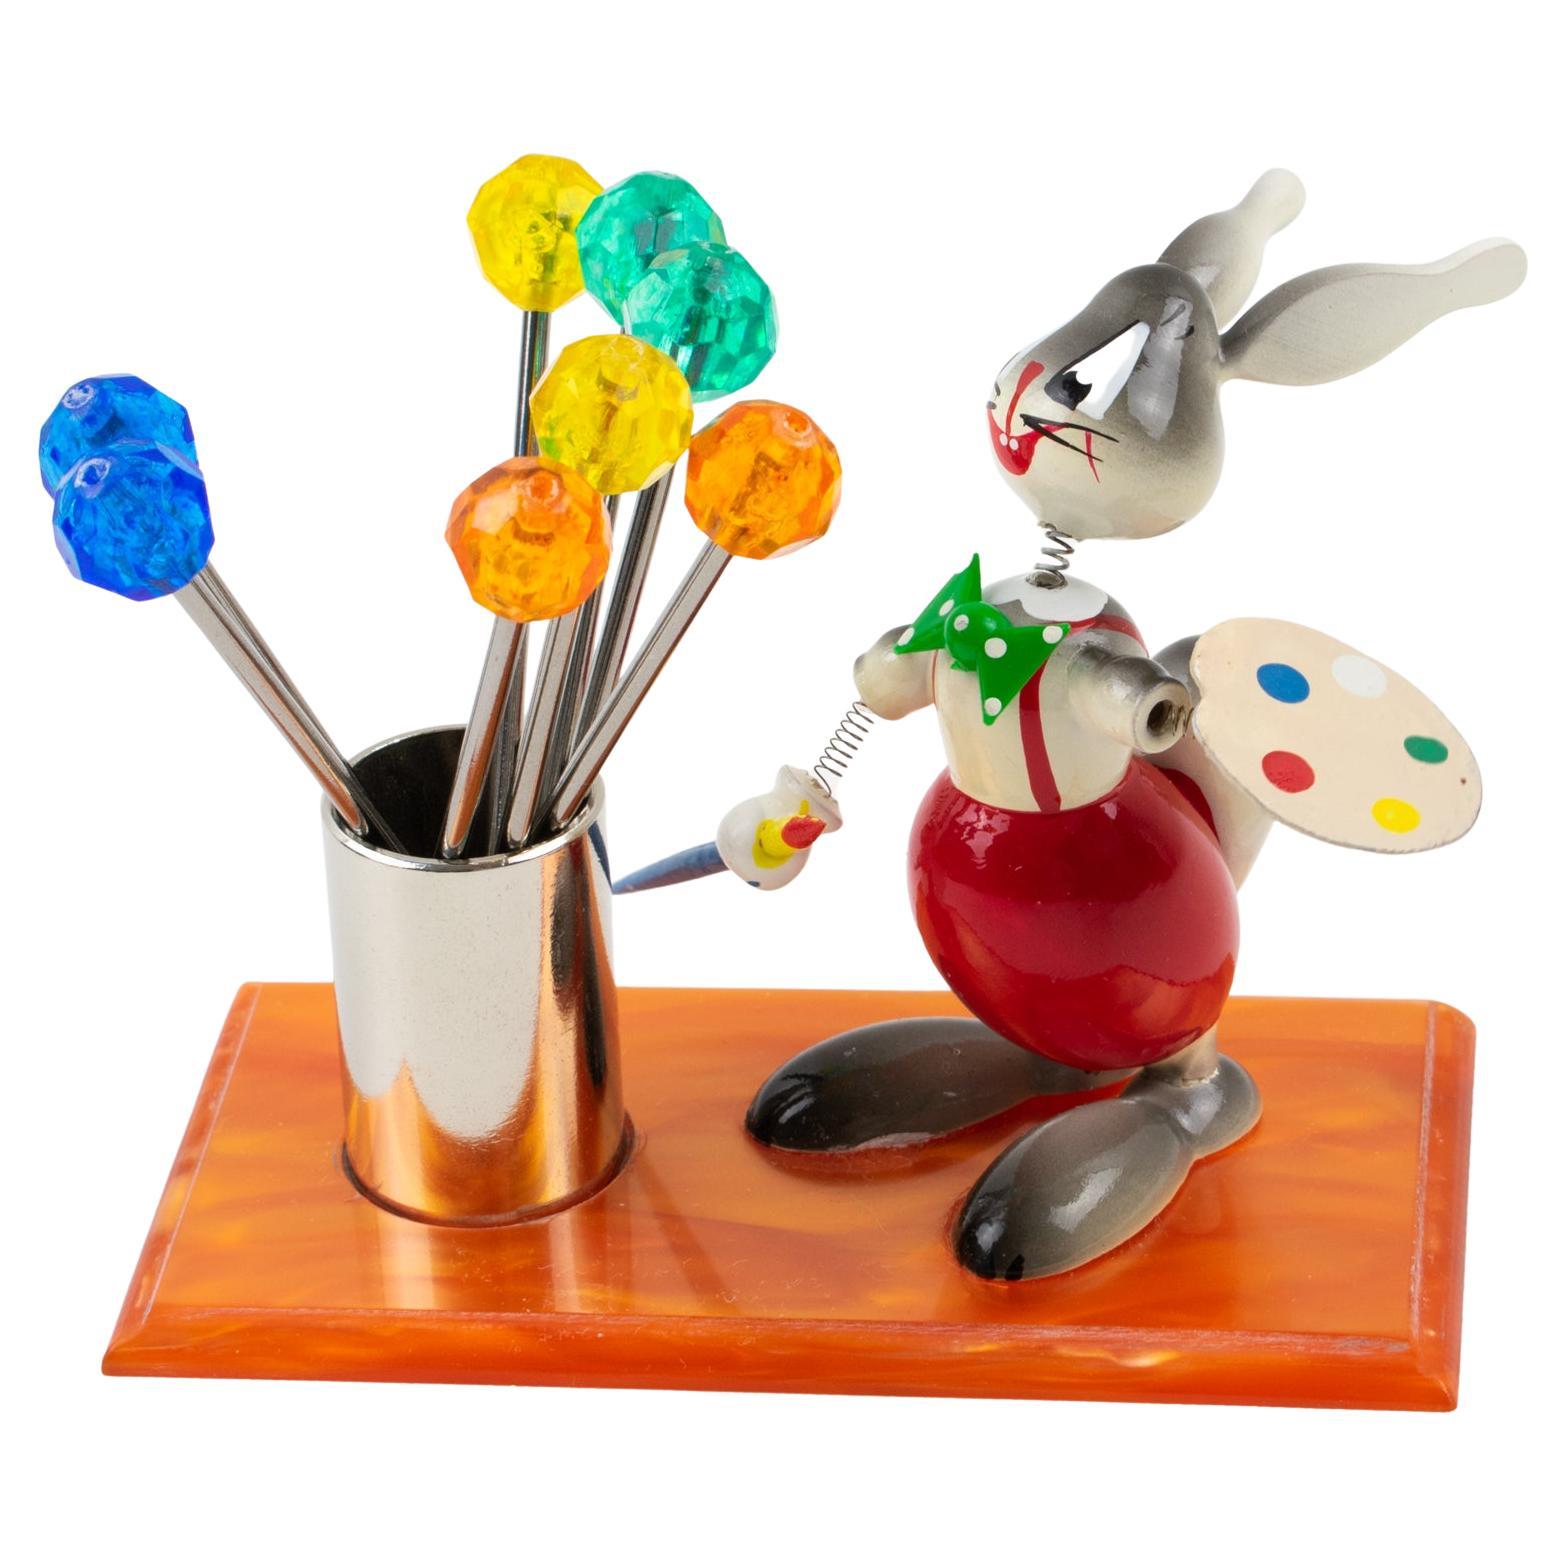 This is a cute French Mid-Century bar accessory cocktail pick set. This little guy is probably not Picasso, but he will be a great conversational piece for your next party with friends !!
The bar set includes a wooden bunny painting next to a